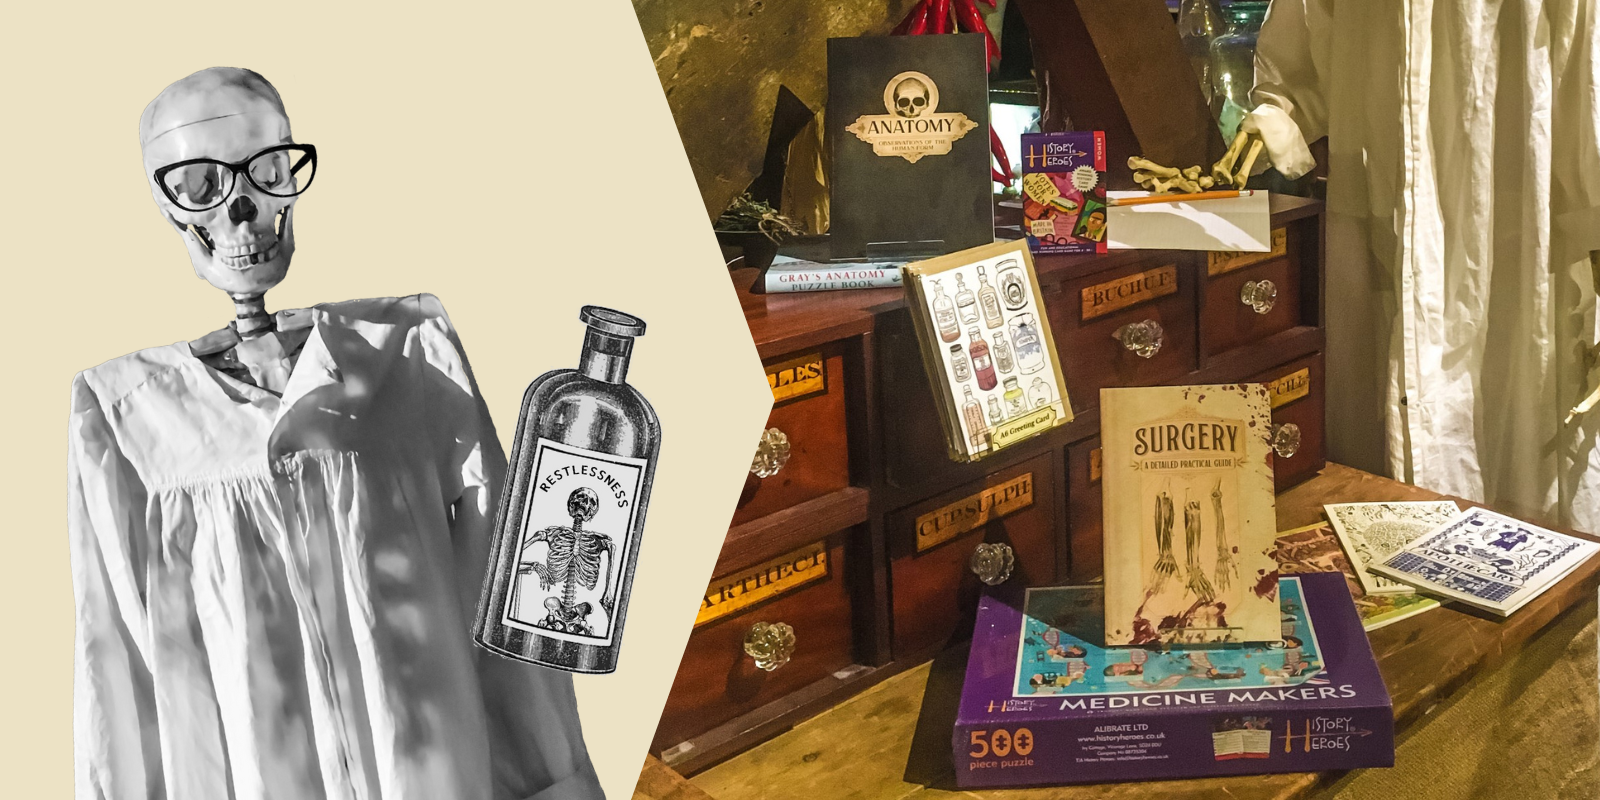 Left: a cut-out black-and-white photo of a skeleton wearing glasses and gown next to an illustrated bottle labelled Restlessness. Right: a colour photo of a selection of products including notebooks, greetings cards and puzzles